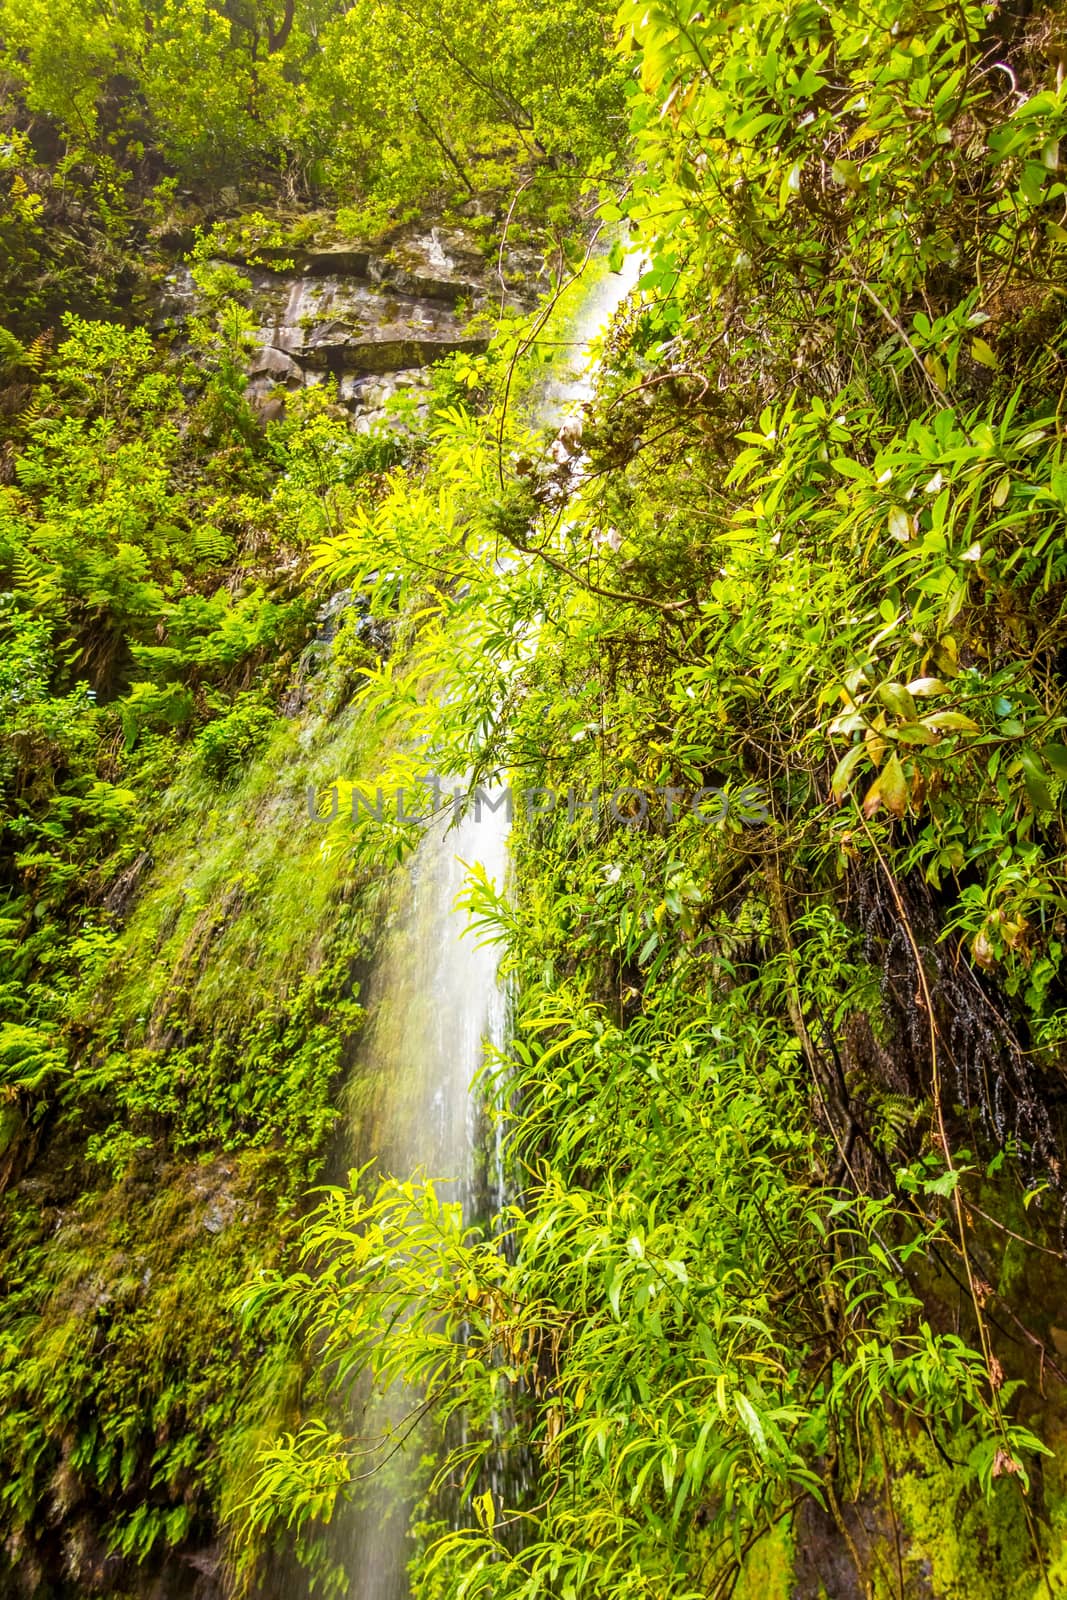 View of waterfall and greenish forest landscape on Madeira, the hiking and flower island